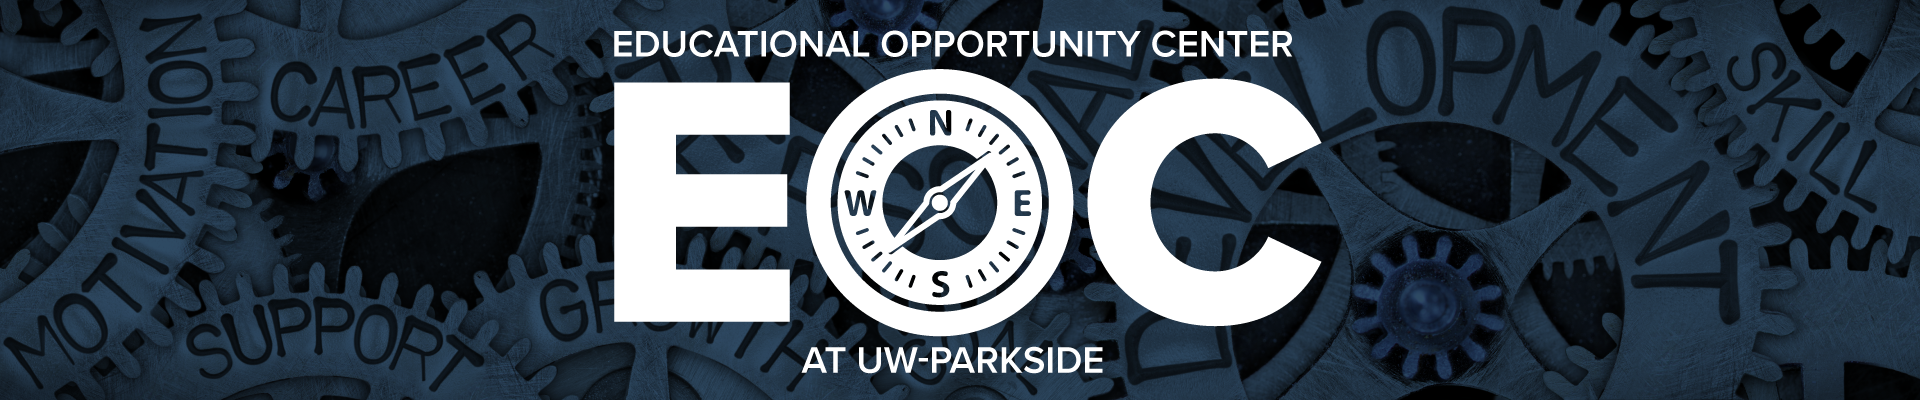 Educational Opportunity Center at UW-Parkside